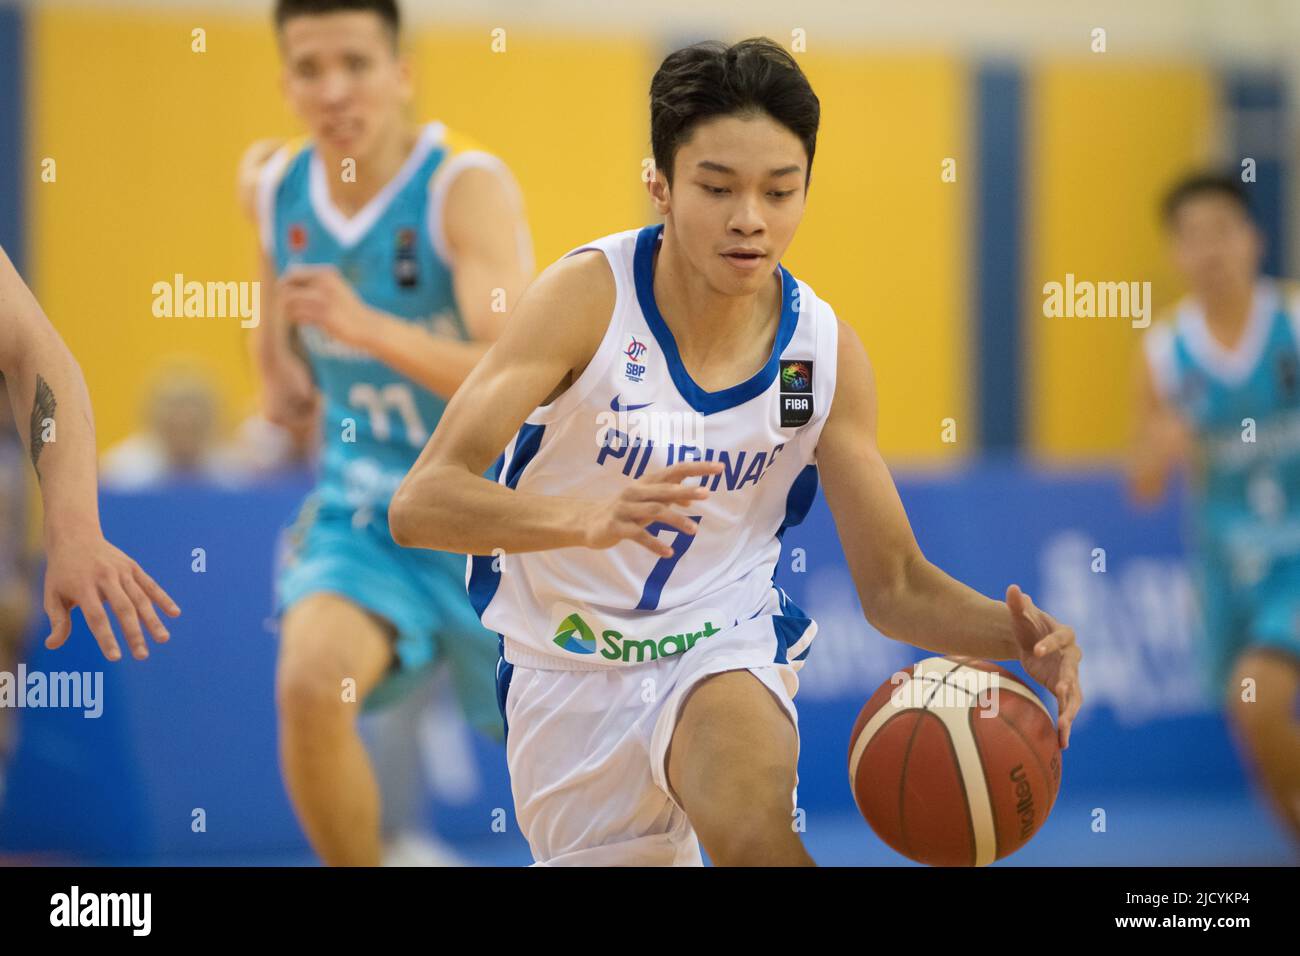 Doha, Qatar. 16th June, 2022. Apl Mcandrei Gemao of the Philippine  Basketball team in action during the FIBA U16 Asian Championship 2022 match  between Kazakhstan and Philippines held at the Al-Gharafa Sports